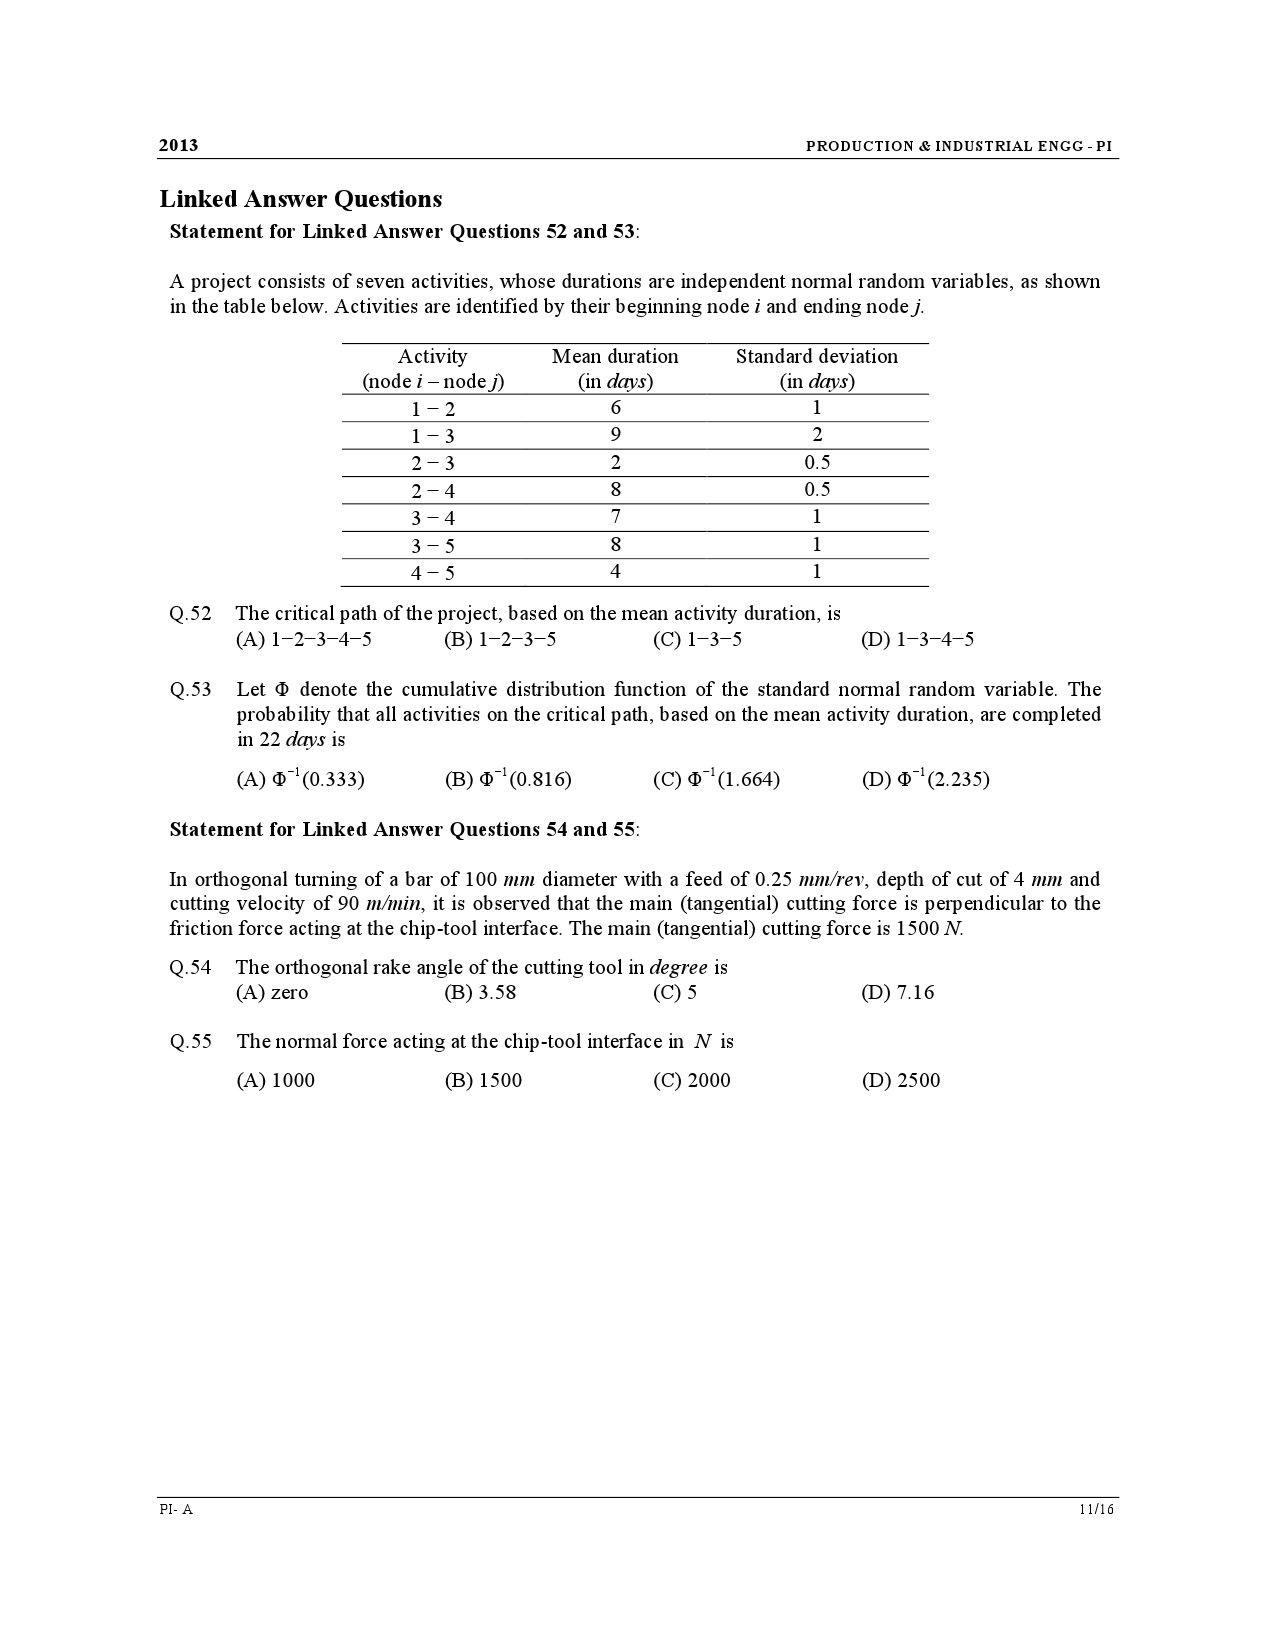 GATE Exam Question Paper 2013 Production and Industrial Engineering 11